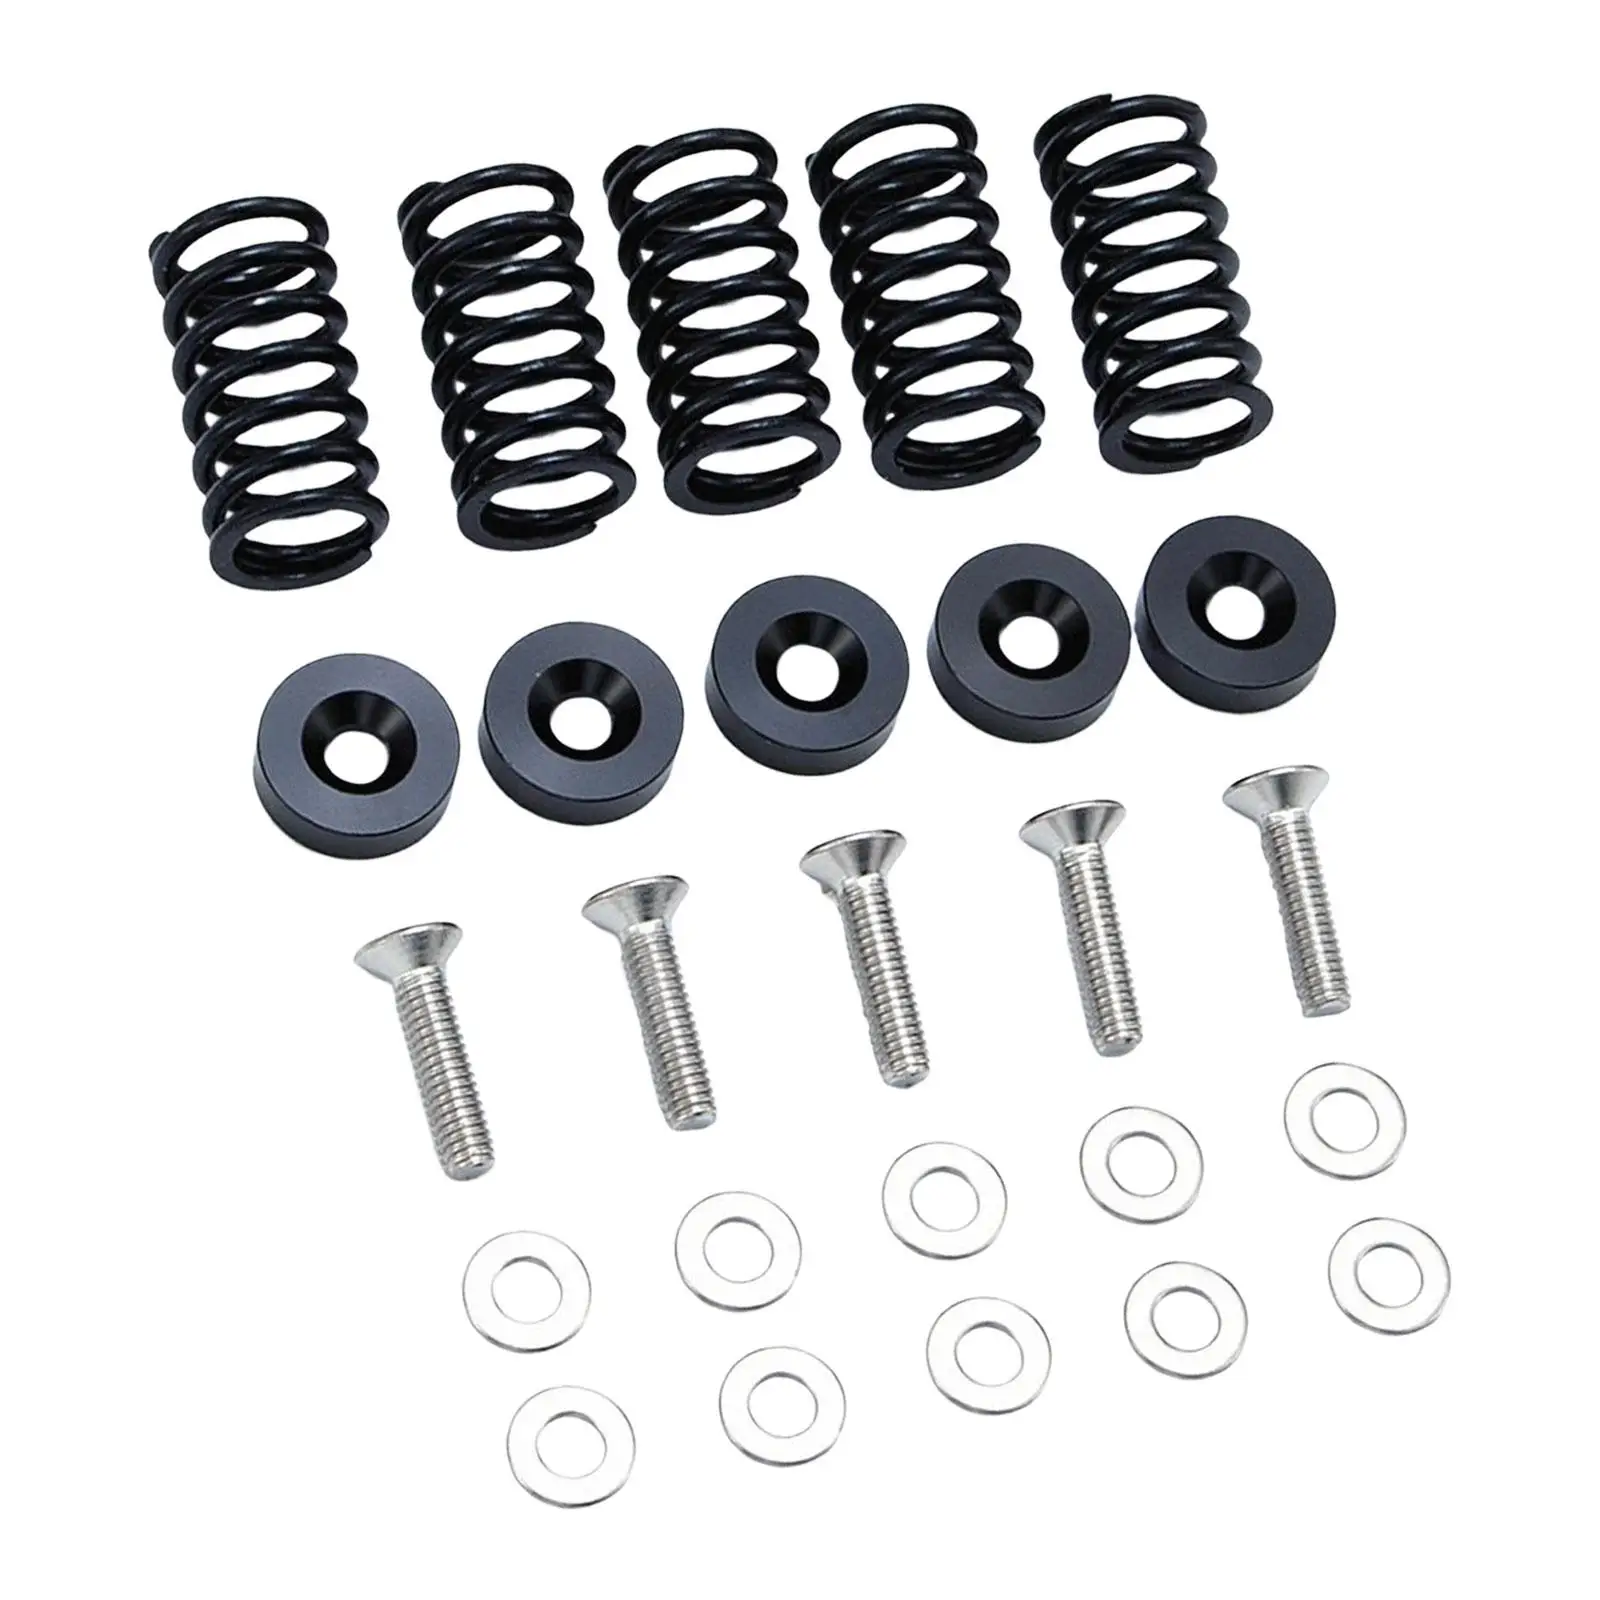 Reinforced Clutch Spring Screw Set Motorcycle Parts for Crf250L